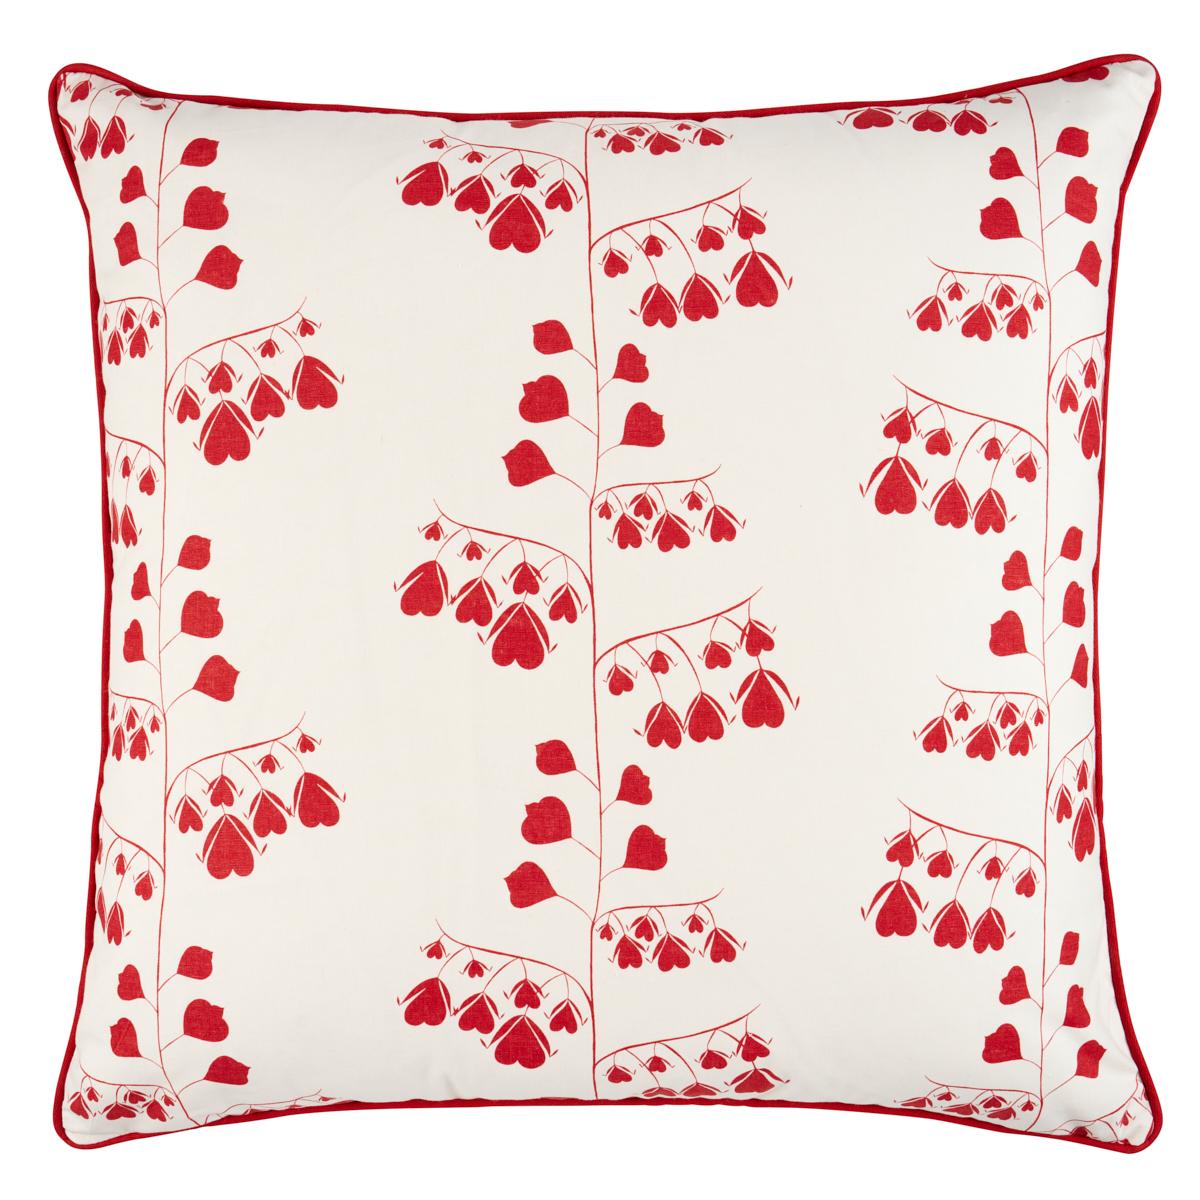 Bleeding Hearts Pillow in Red 24 x 24" For Sale